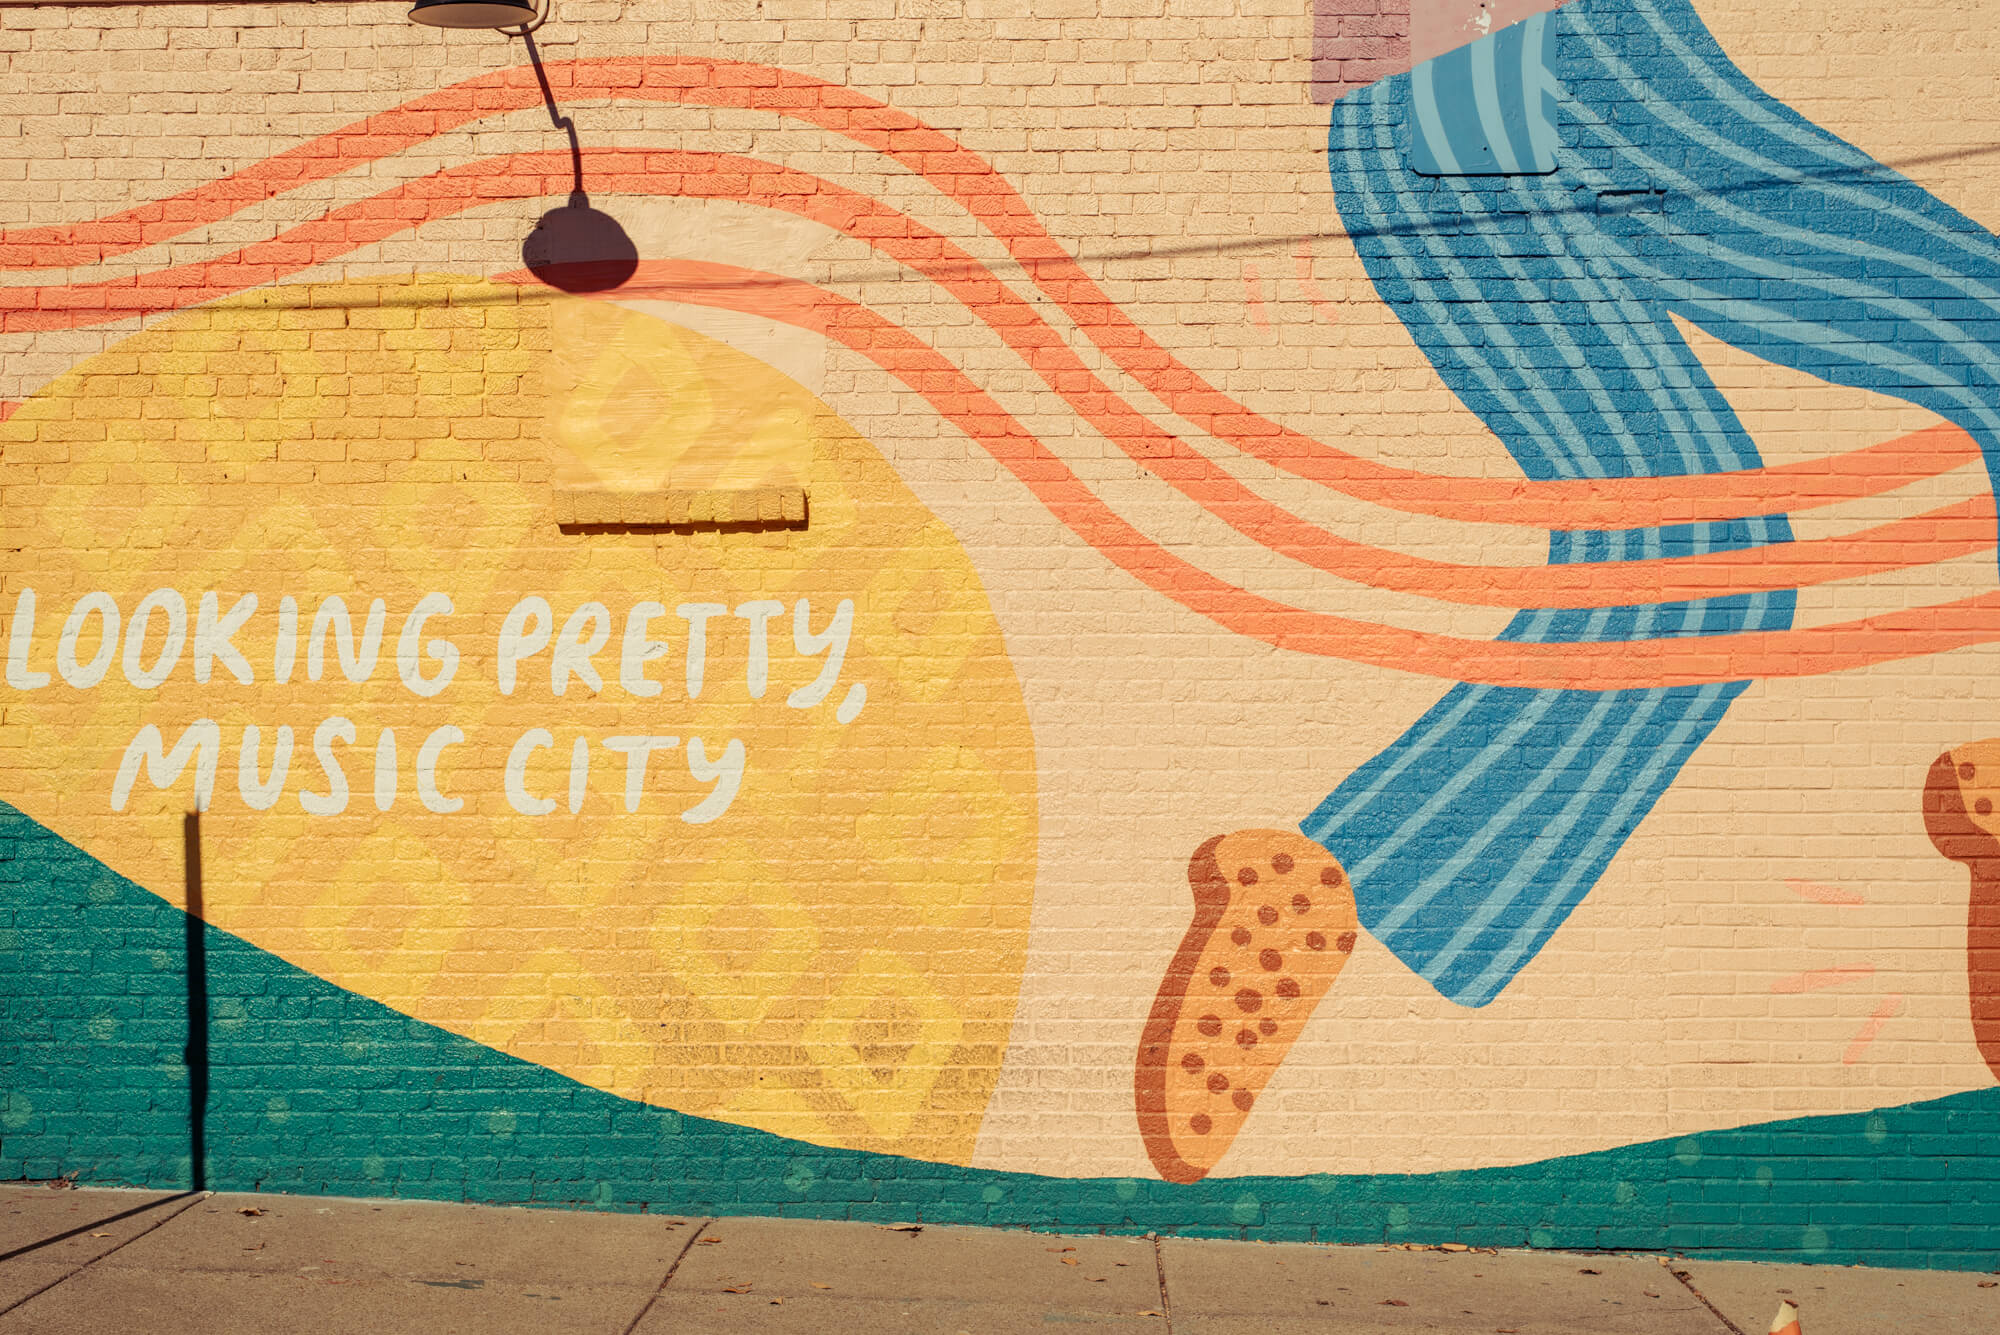 large green, orange, and yellow mural on a brick wall in Nashville's 12 South neighborhood. It features a pair of dancing legs wearing striped blue pants and polk-a-dot orange and red shoes. The white hand-written text says "Looking pretty Music City"